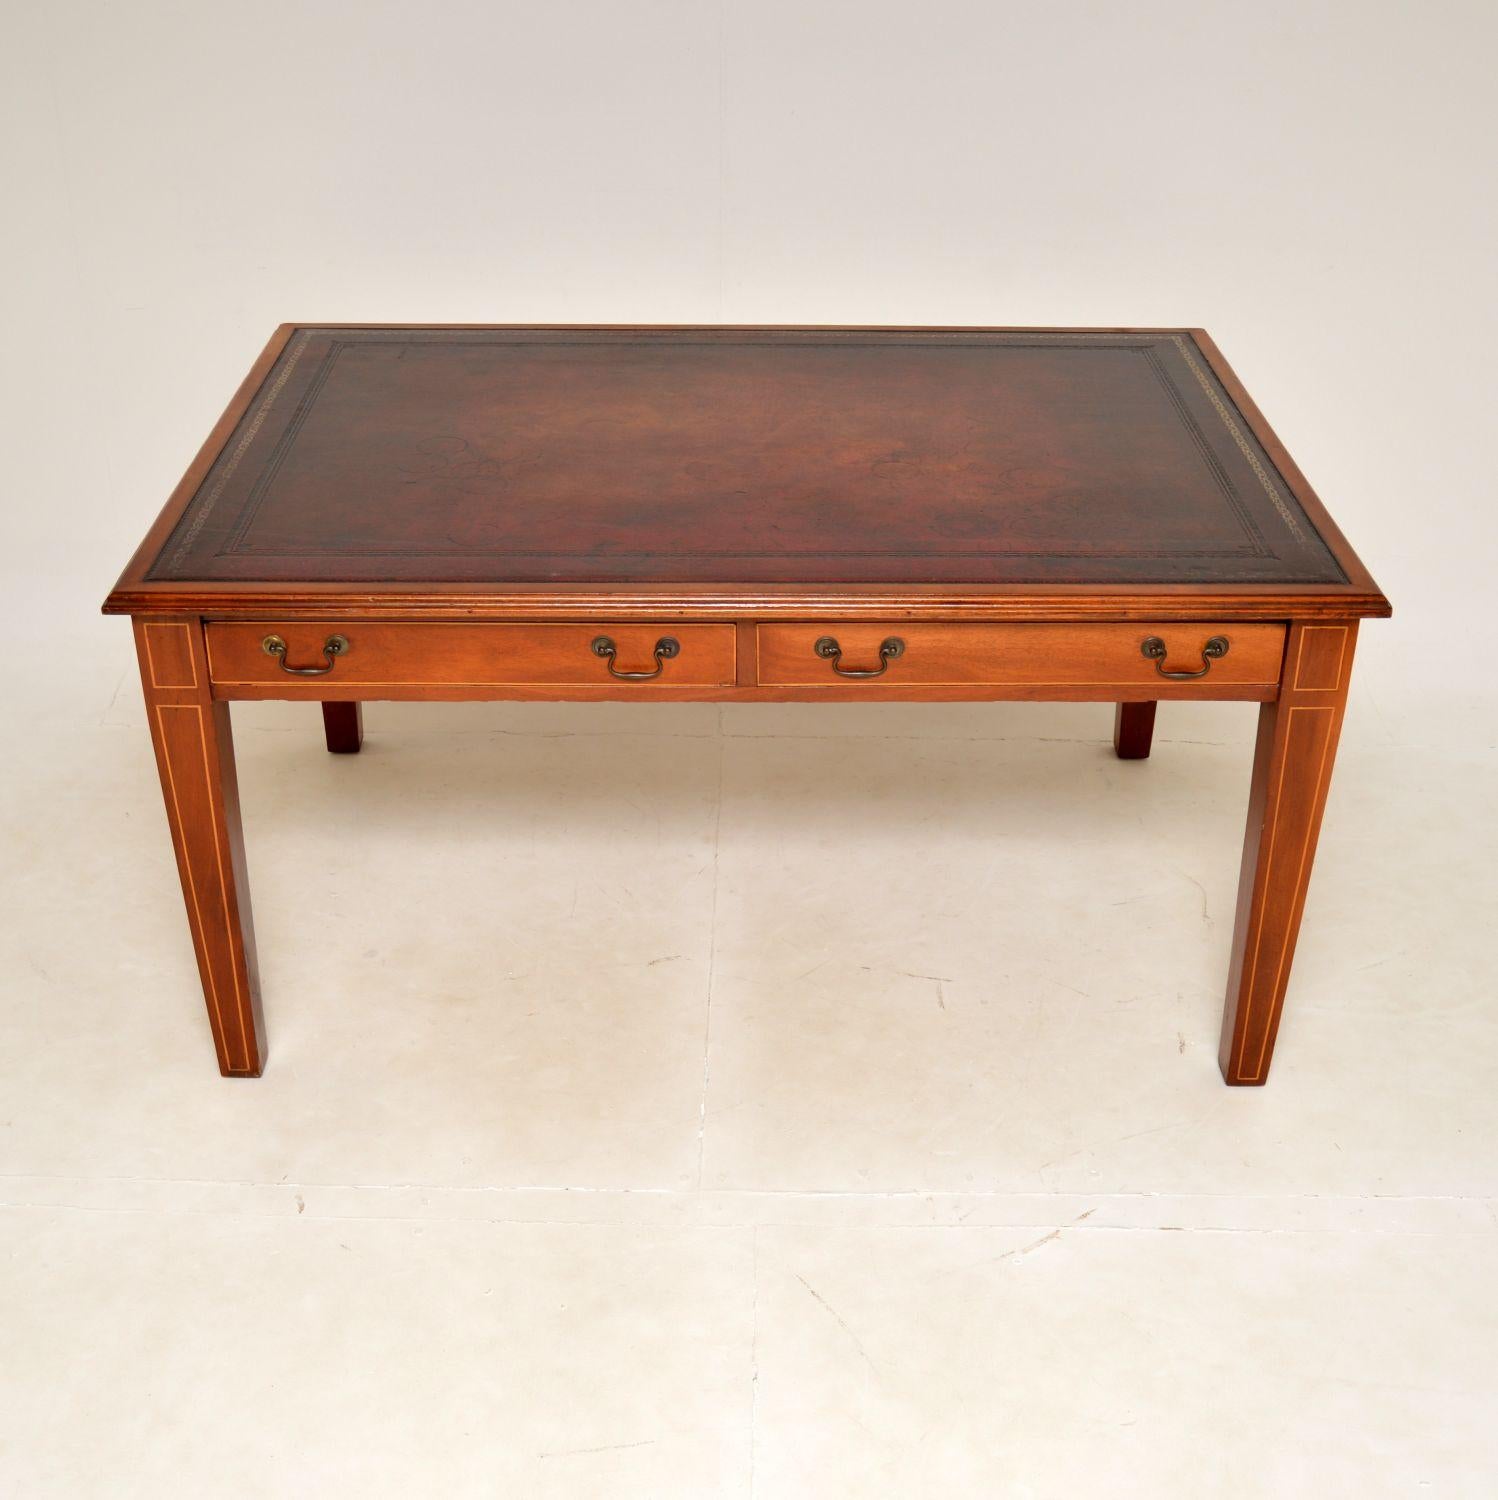 A very large and impressive and desk. This was made in England, it dates from around the 1890-1900 period.

It is of super quality, the wood has acquired a gorgeous light colour tone and has satin wood inlays around the borders. The tapered legs